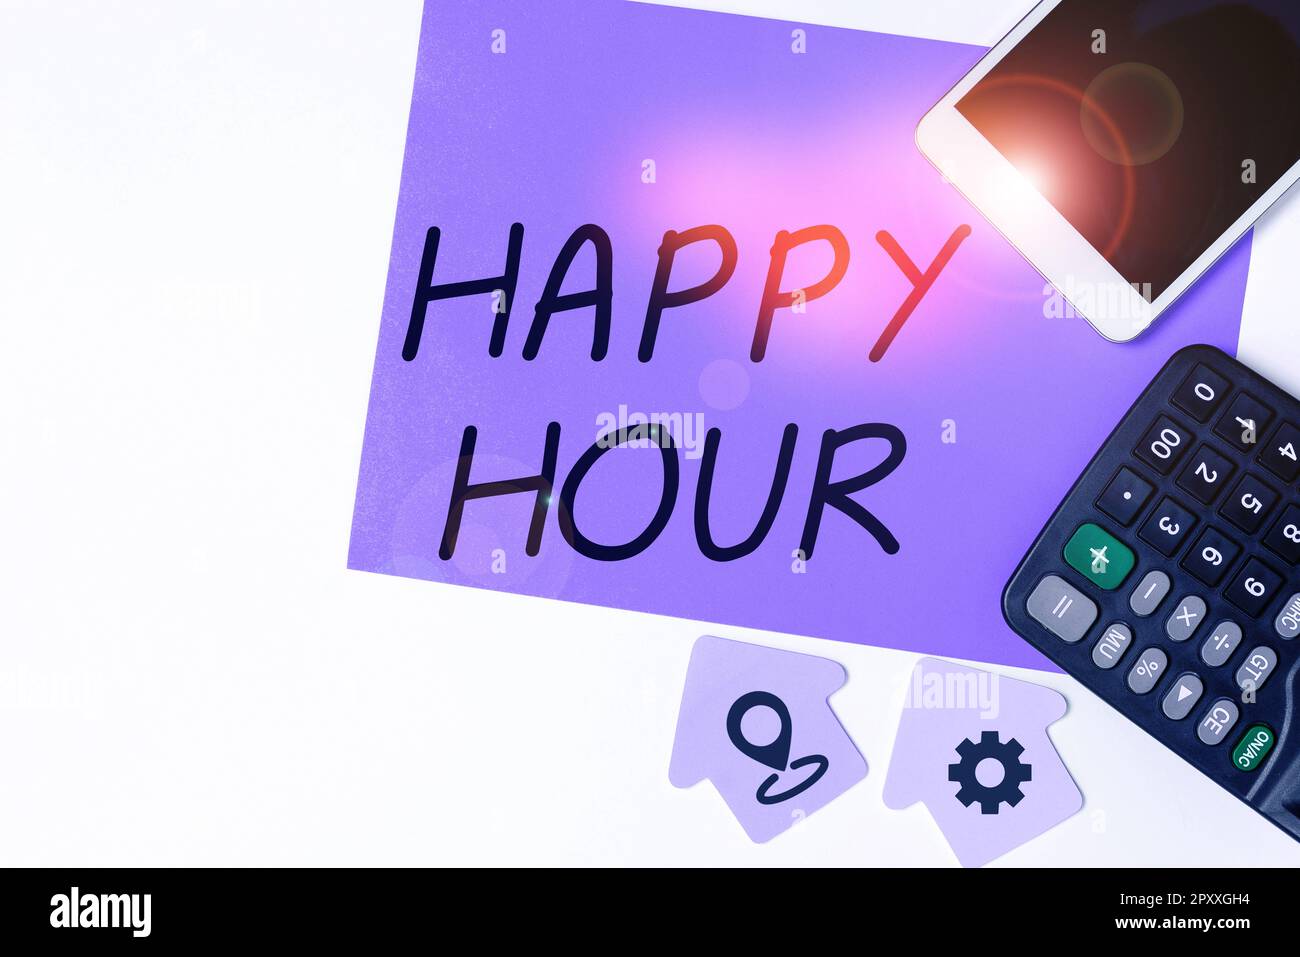 Hand writing sign Happy Hour, Word Written on Spending time for activities that makes you relax for a while Stock Photo